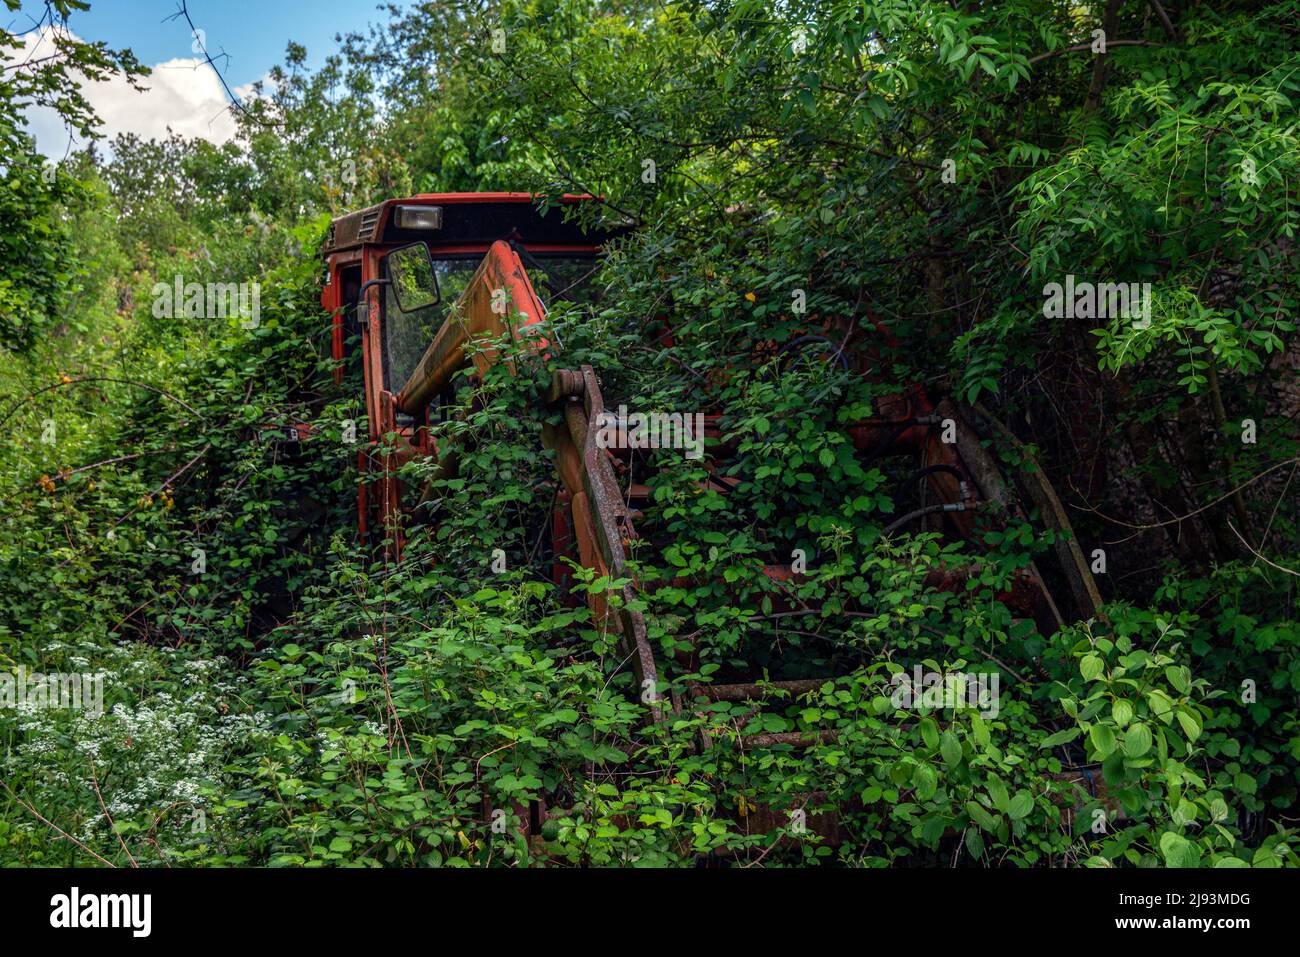 An abandoned and overgrown with ivy, earth moving tractor Stock Photo